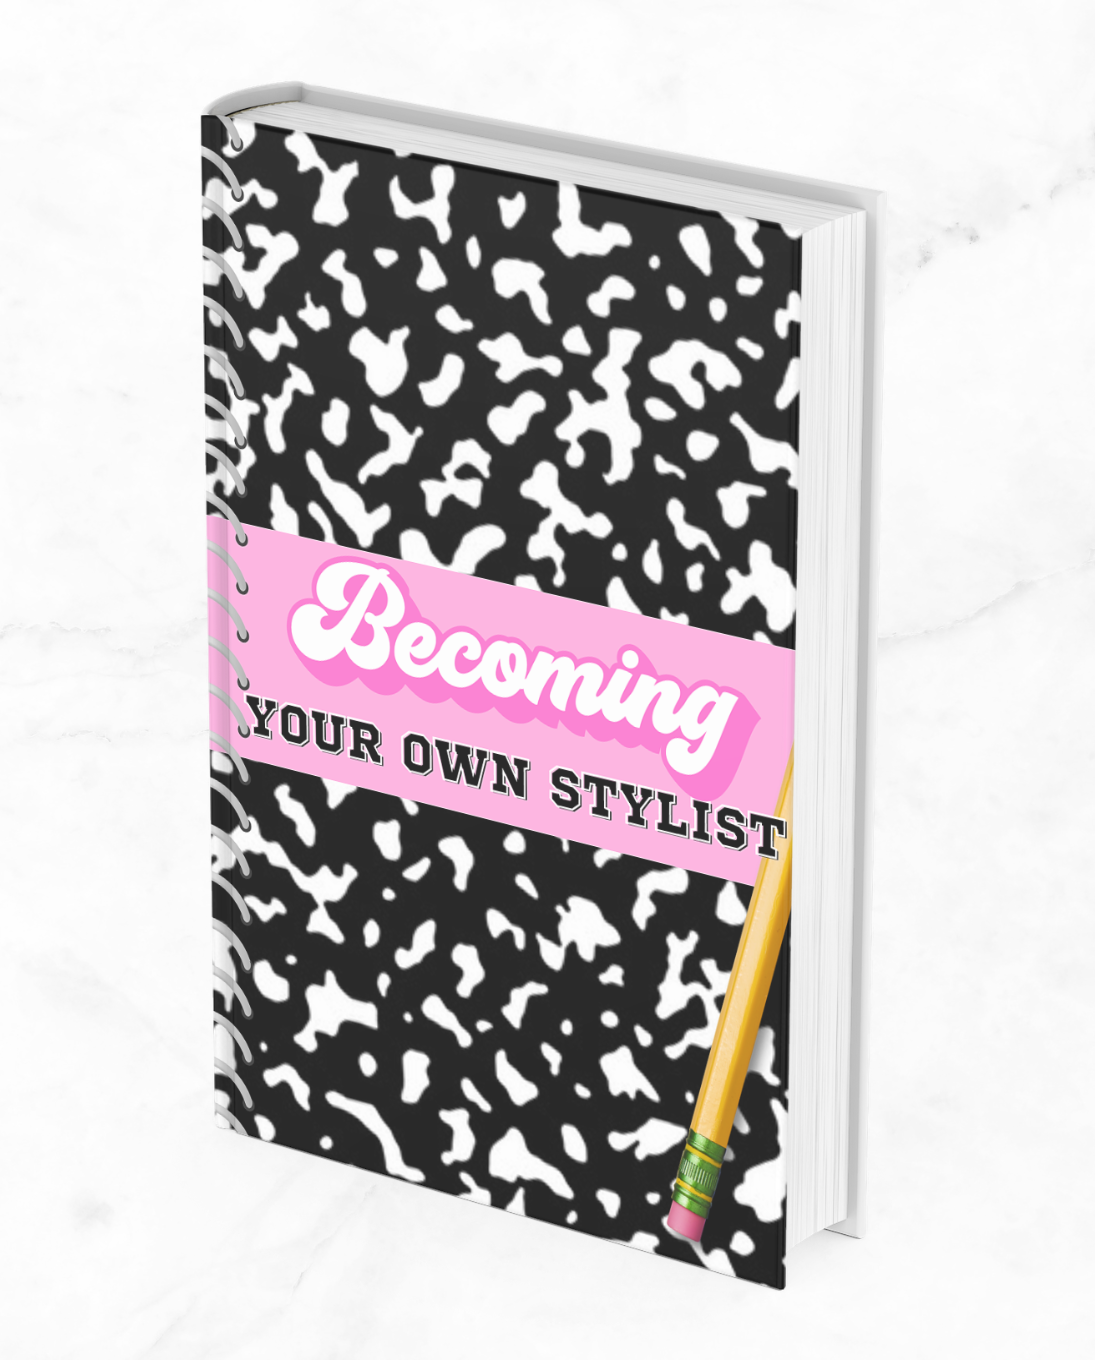 Becoming Your Own Stylist Ebook